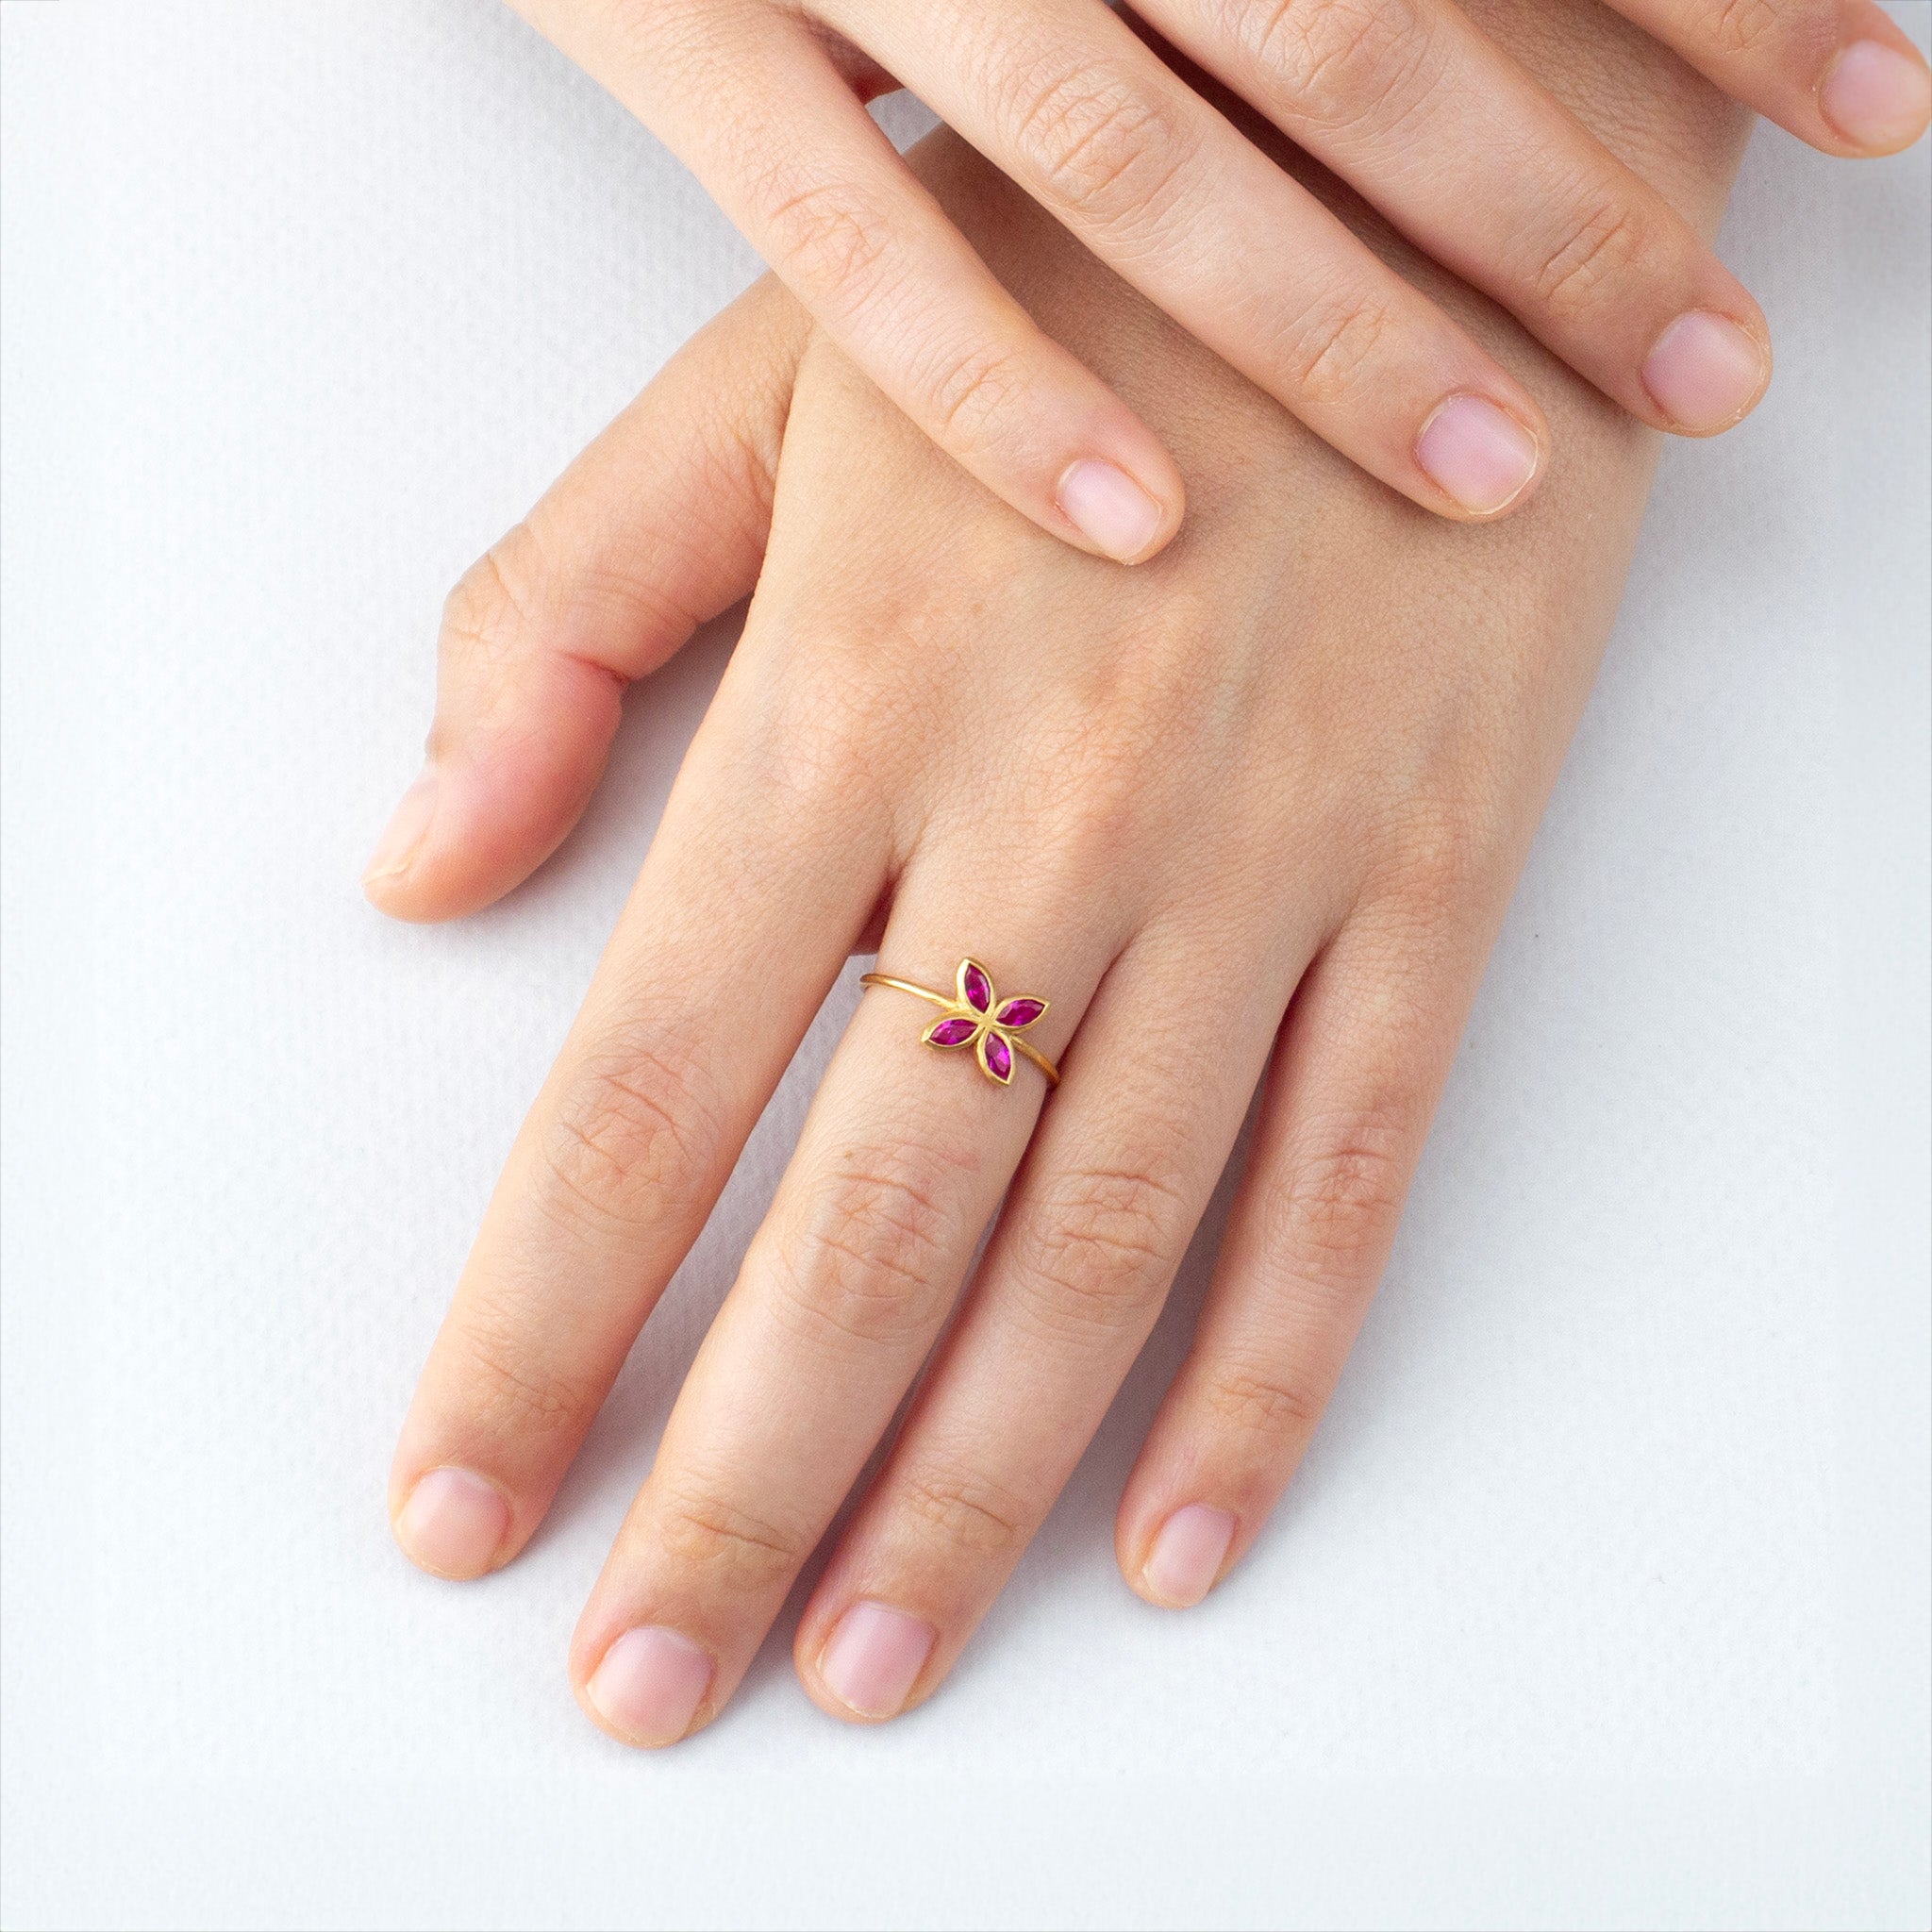 Model wearing the delicate Ruby Marquee Gold ring, its flower-shaped design and radiant color making it a stunning and cheerful accessory for any outfit.